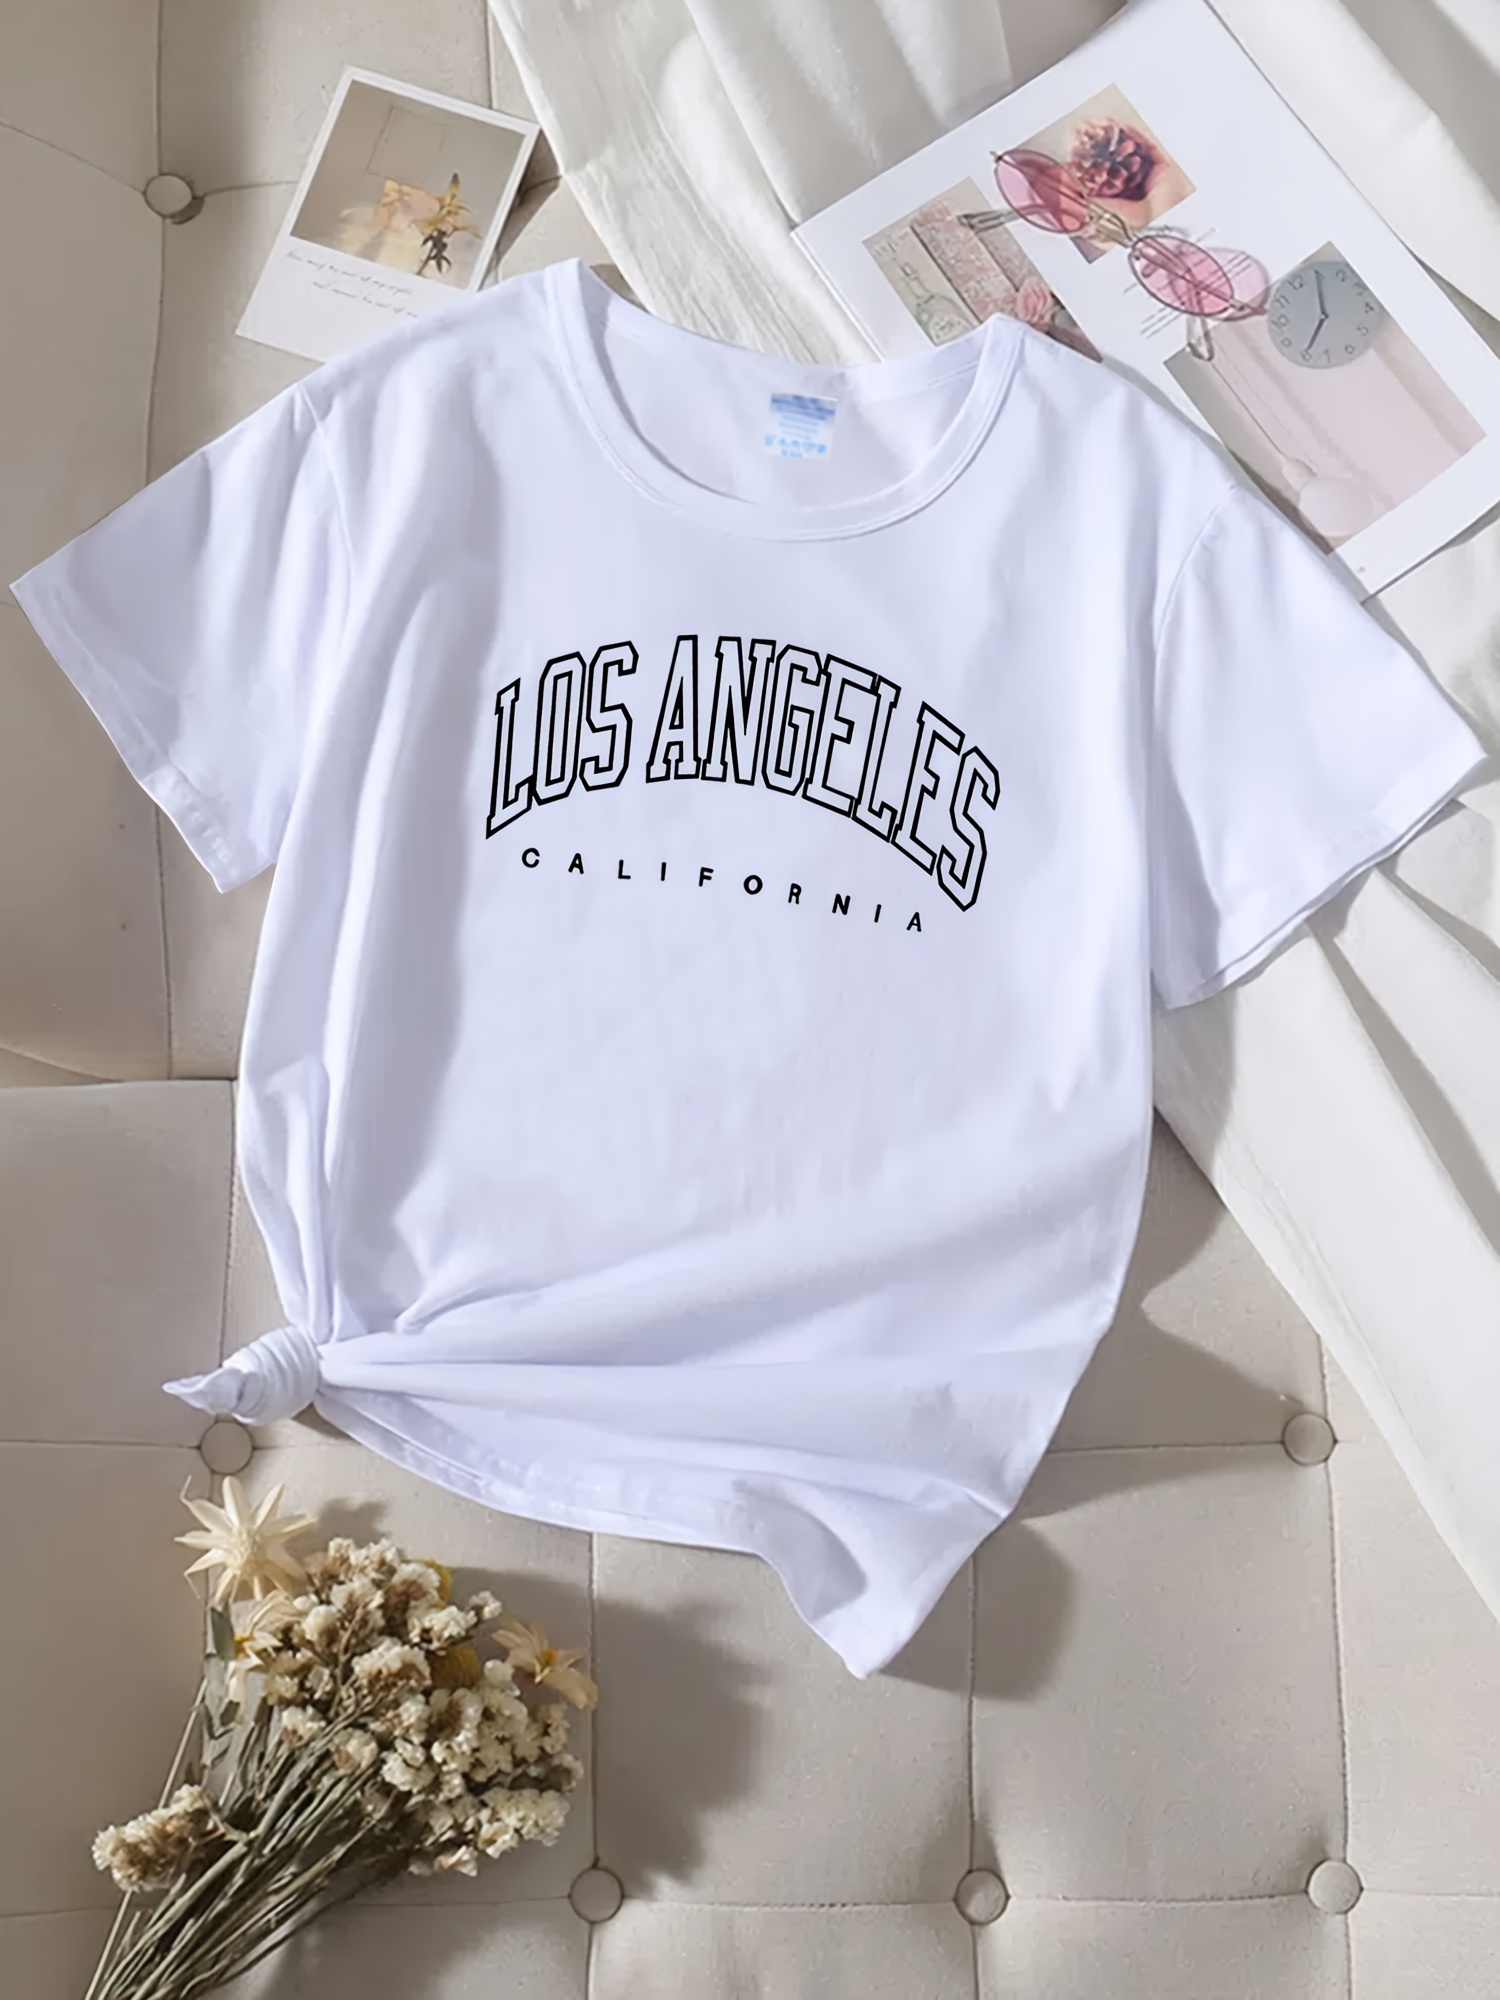 Temu Letter Graphic Crew Neck Cotton Blend T-Shirt, Blouses, Tee, Women's Los Angeles Letter Print Casual Loose Short Sleeve Fashion Summer Women's